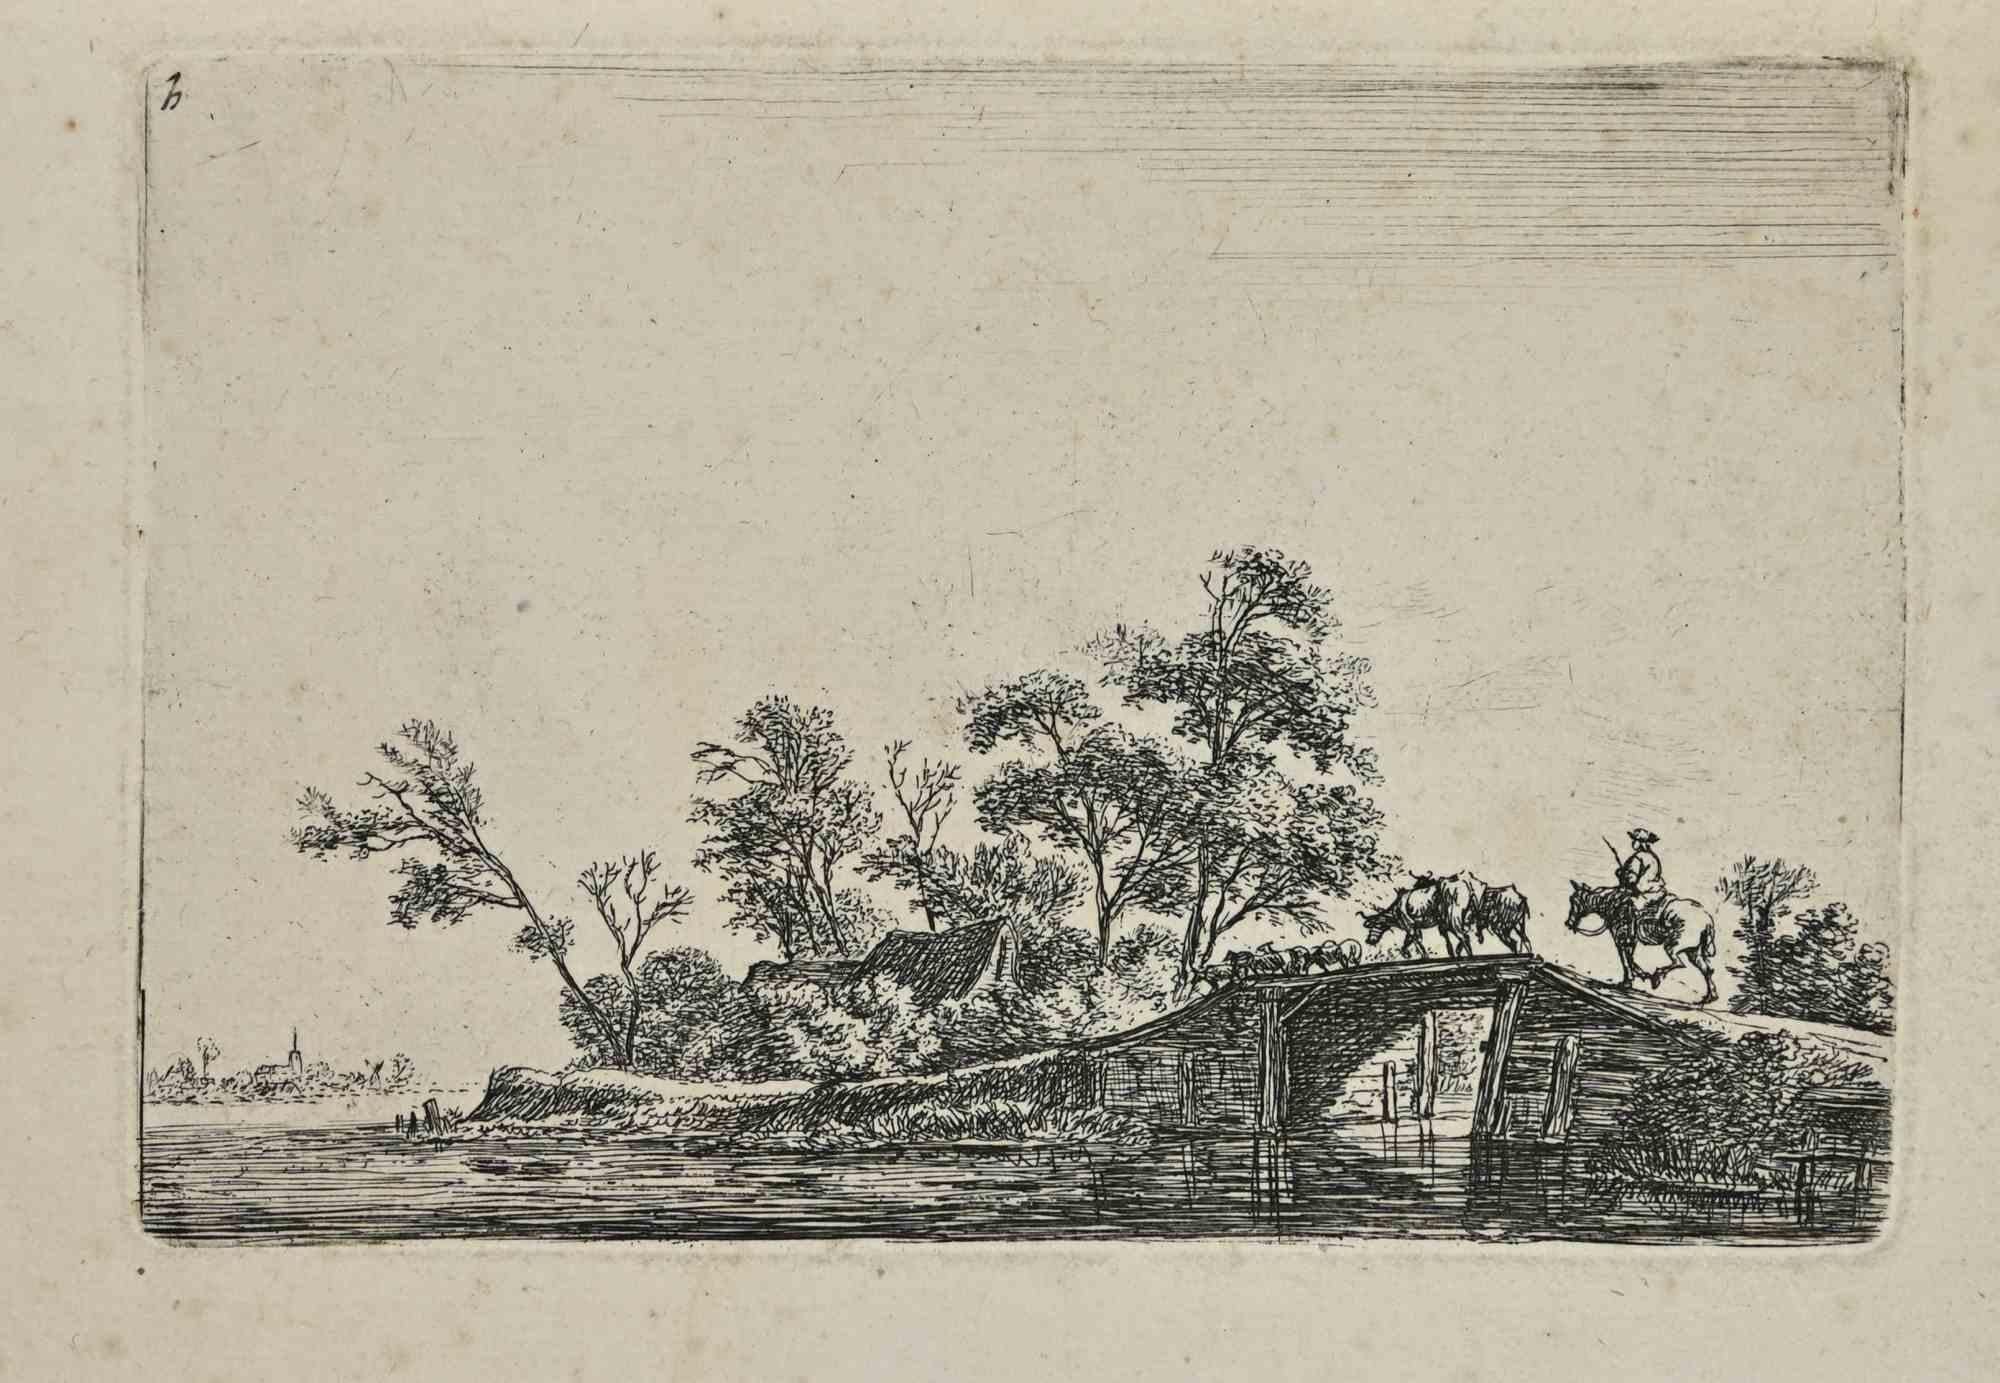 Shepherd With Cattle On A Wooden Bridge is an etching on ivory-colored paper realized by Antonie Waterloo in the late 17th century.

Good conditions with slight foxing.

The artwork is realized through deft short strokes by mastery.